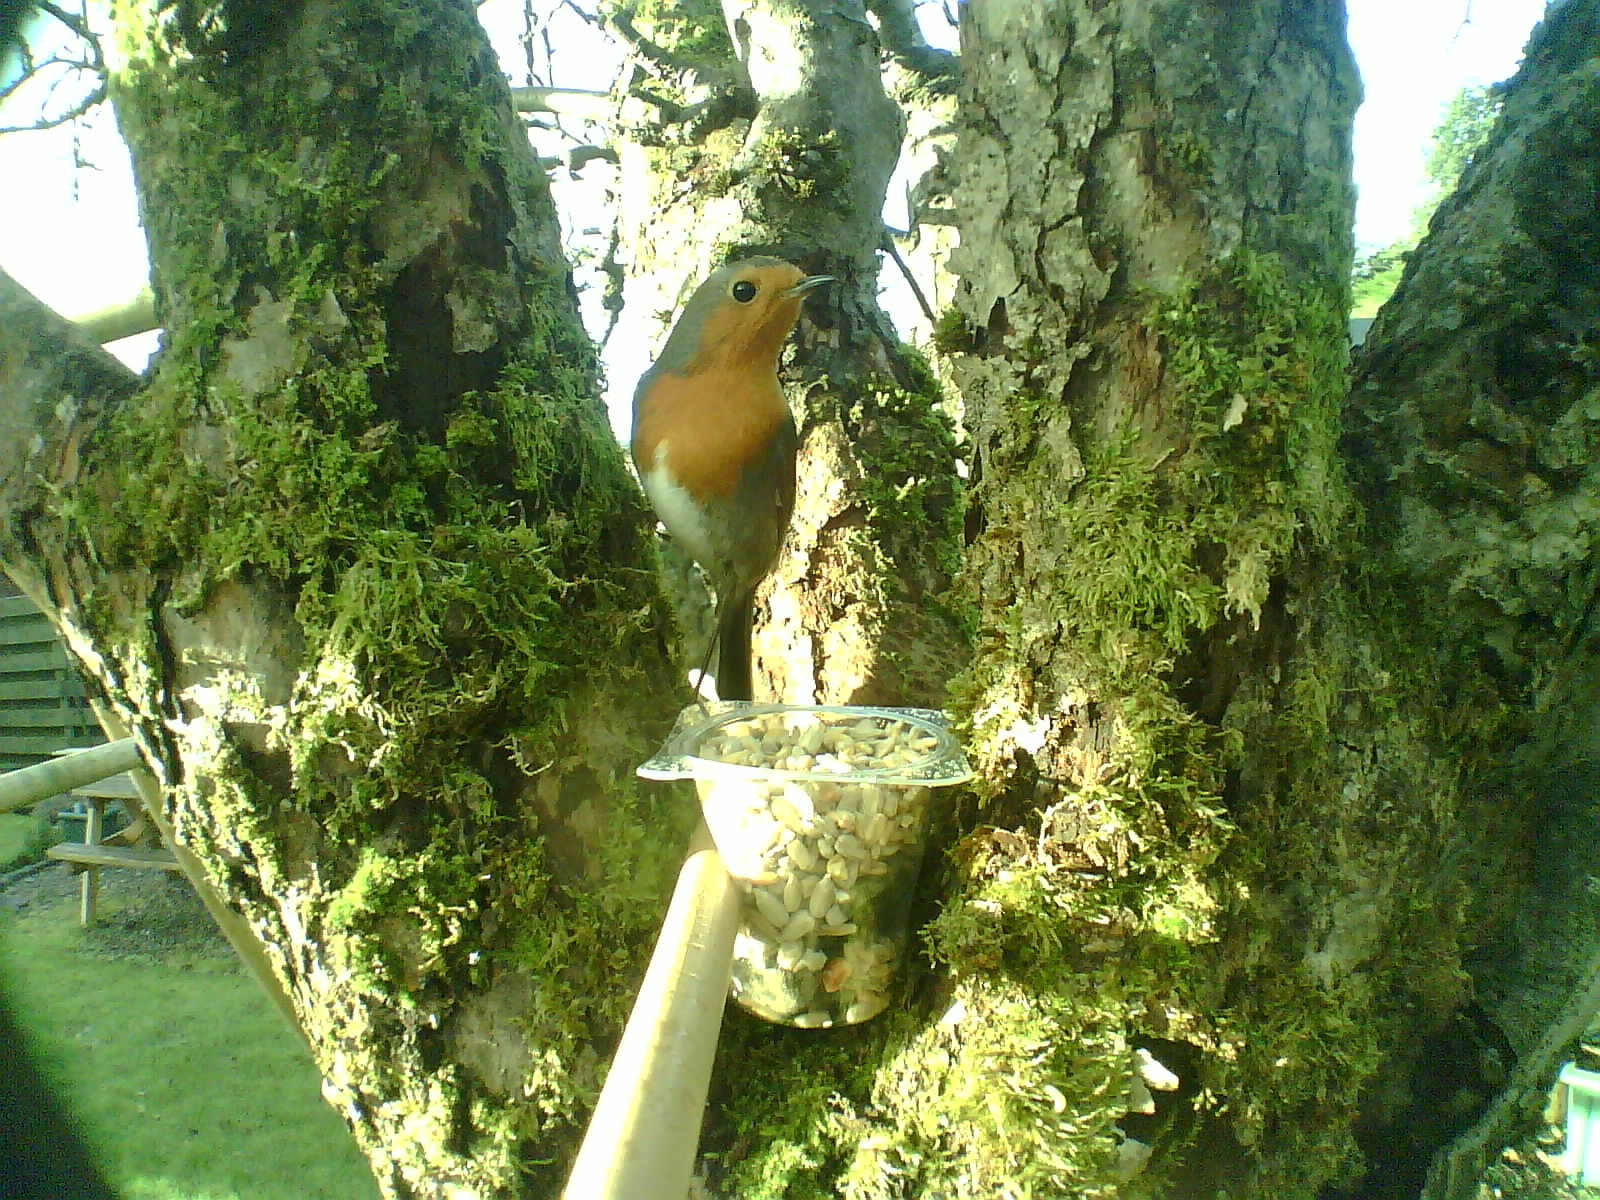 Robin holding a vertical branch of a tree